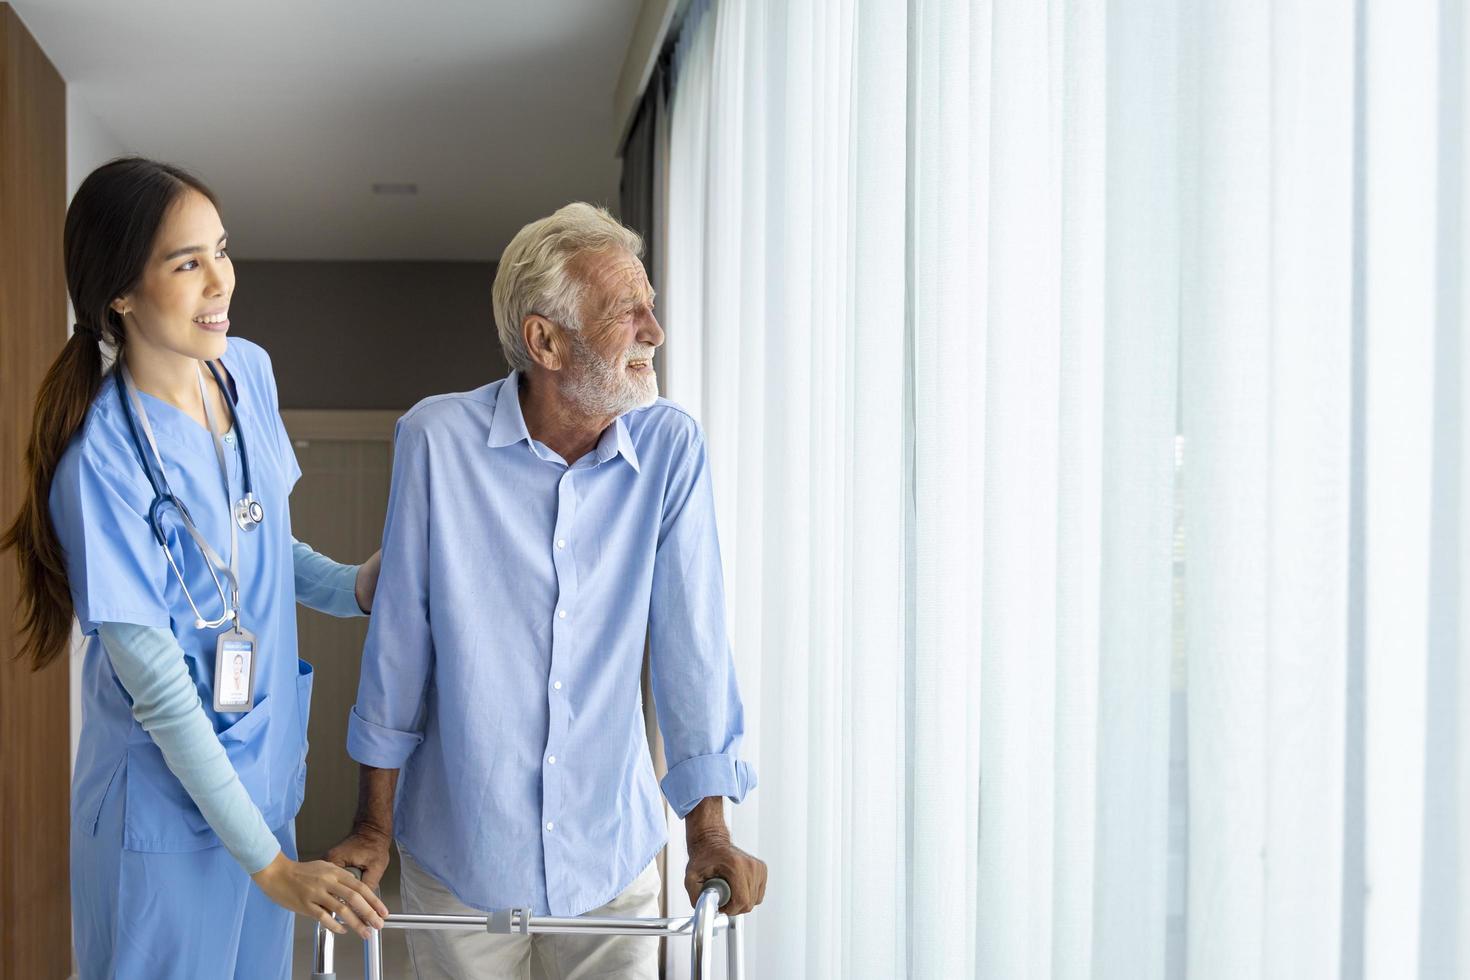 Hospice nurse is supporting Caucasian man to use walker while looking out the window in pension retirement center for home care rehabilitation and post treatment recovery process photo